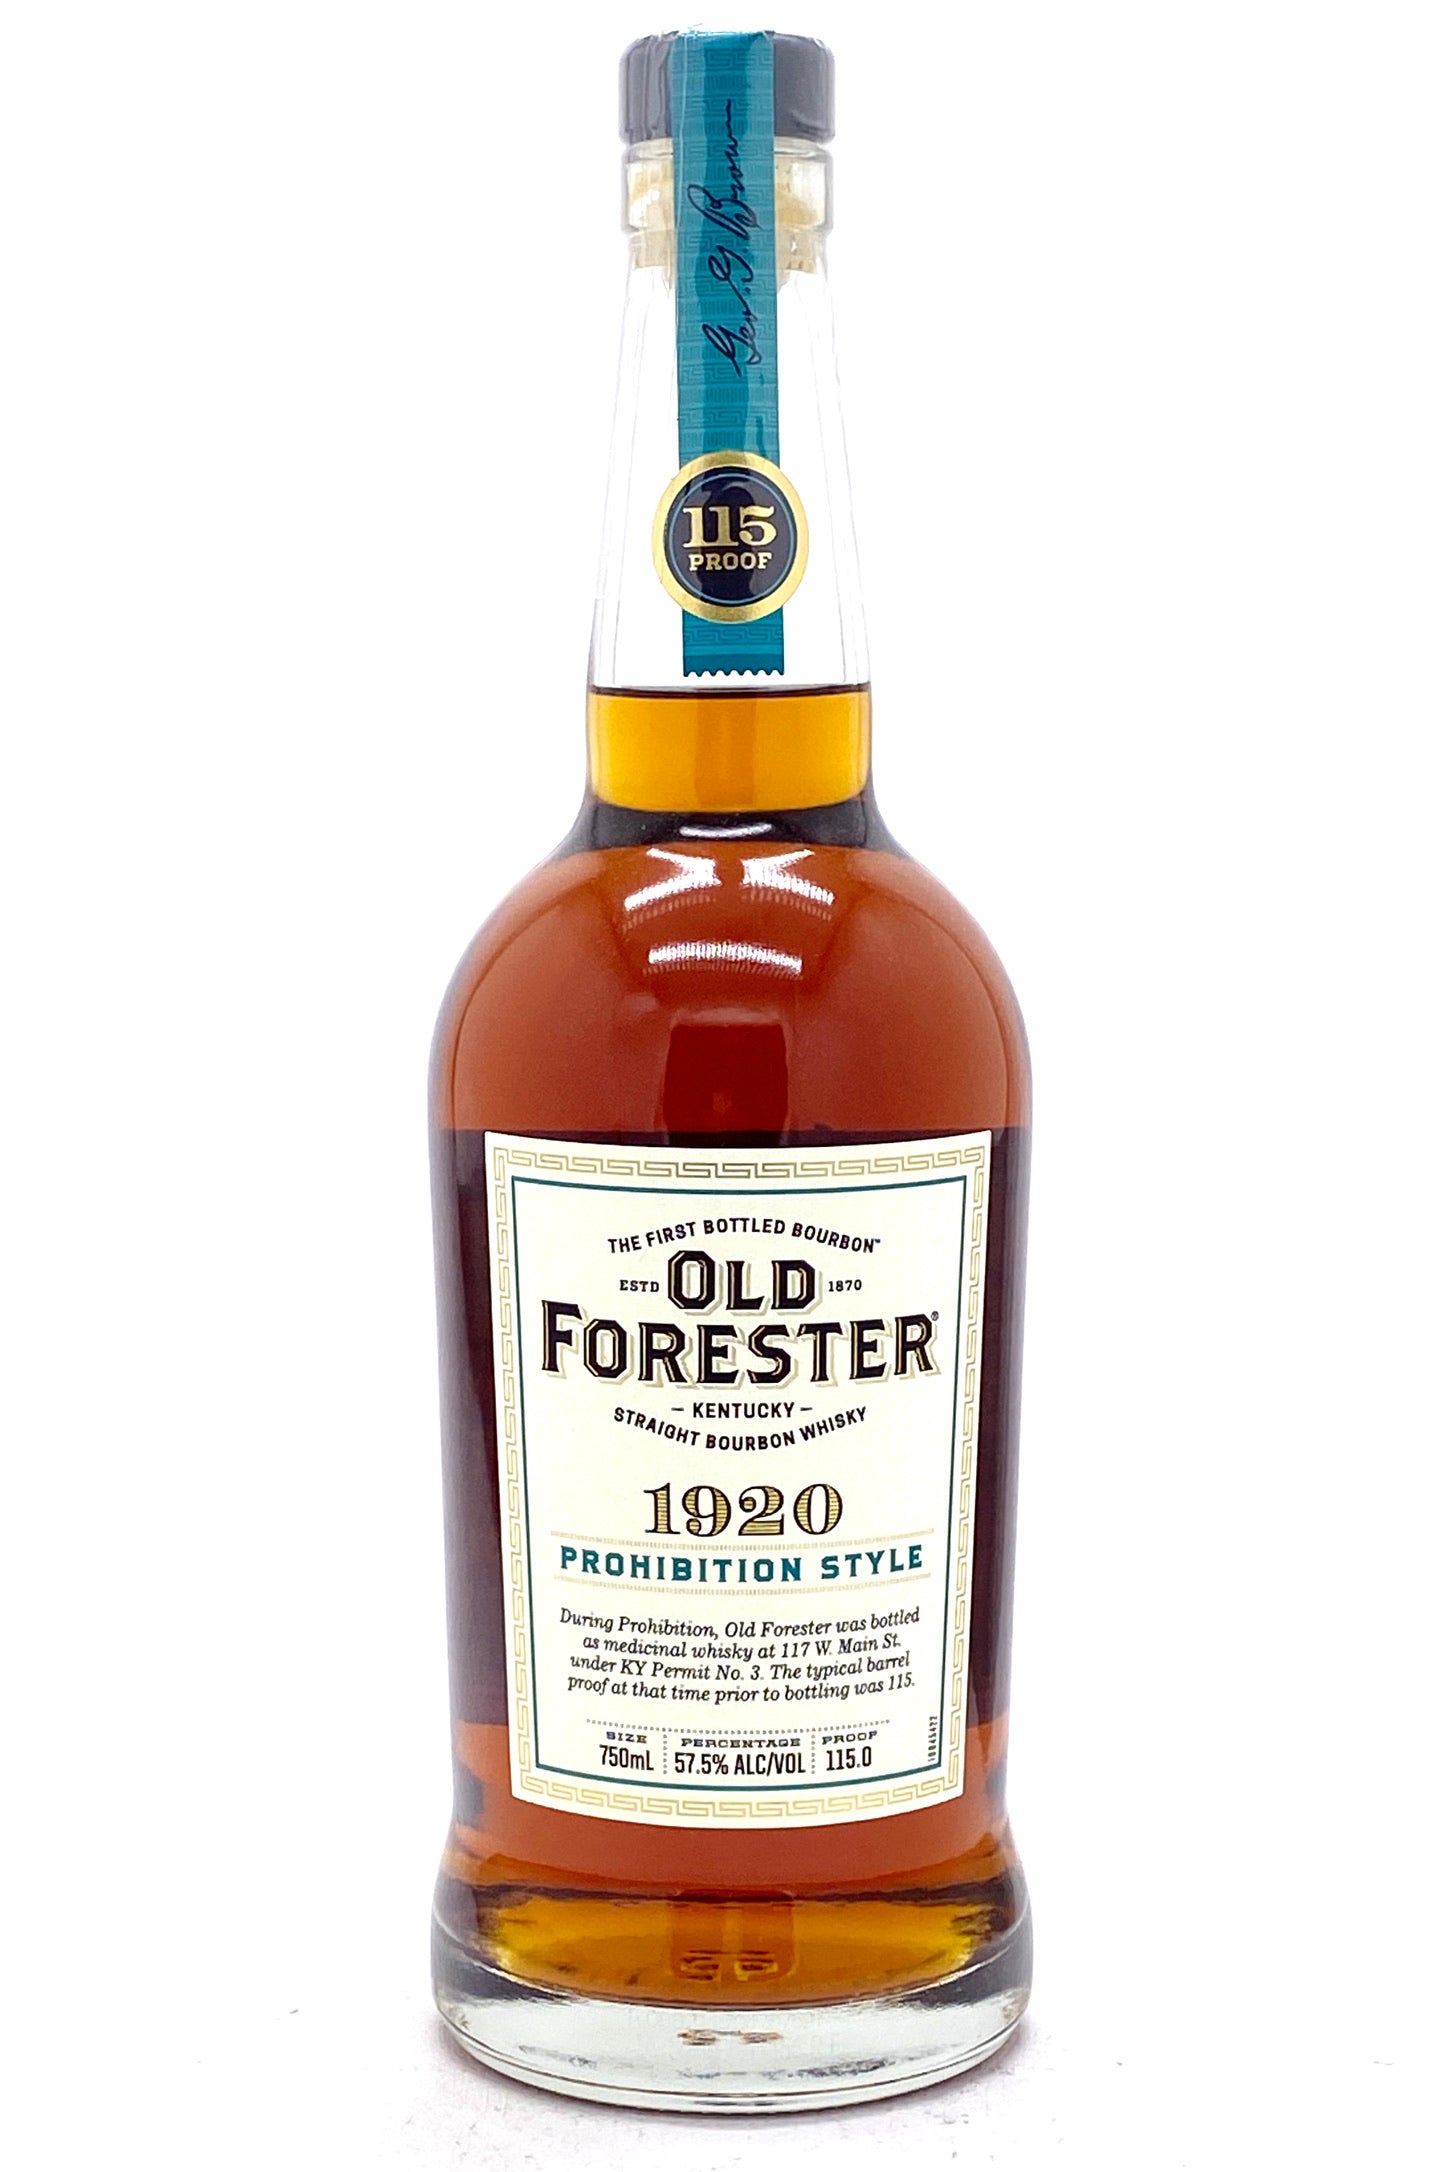 Buy Old Forester 1920 Prohibition Style Bourbon Whiskey Online